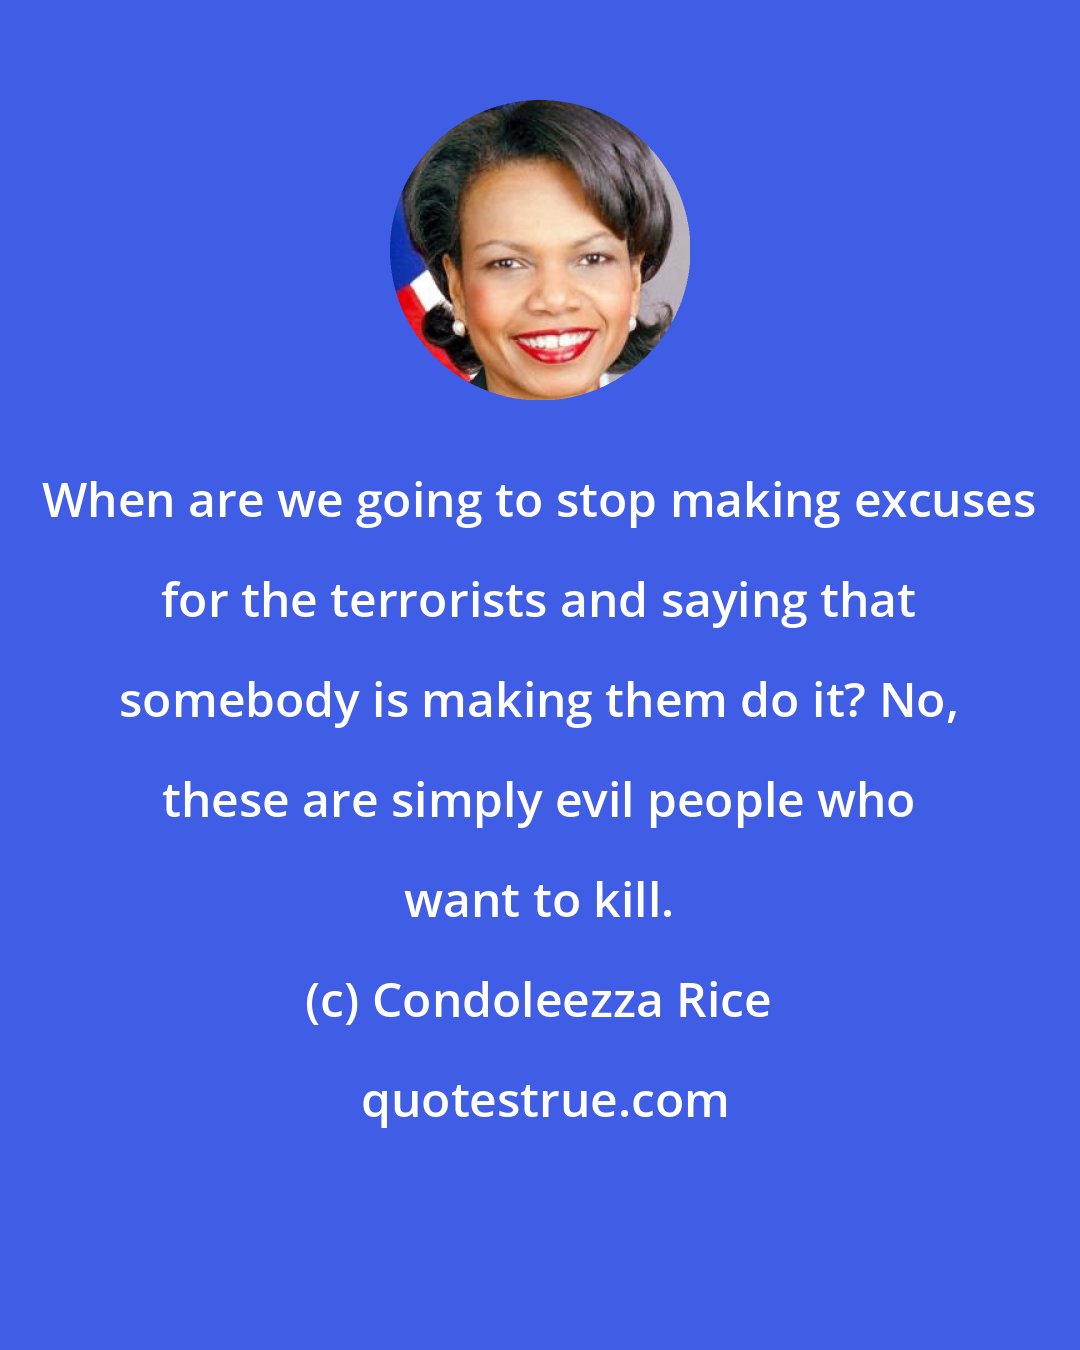 Condoleezza Rice: When are we going to stop making excuses for the terrorists and saying that somebody is making them do it? No, these are simply evil people who want to kill.